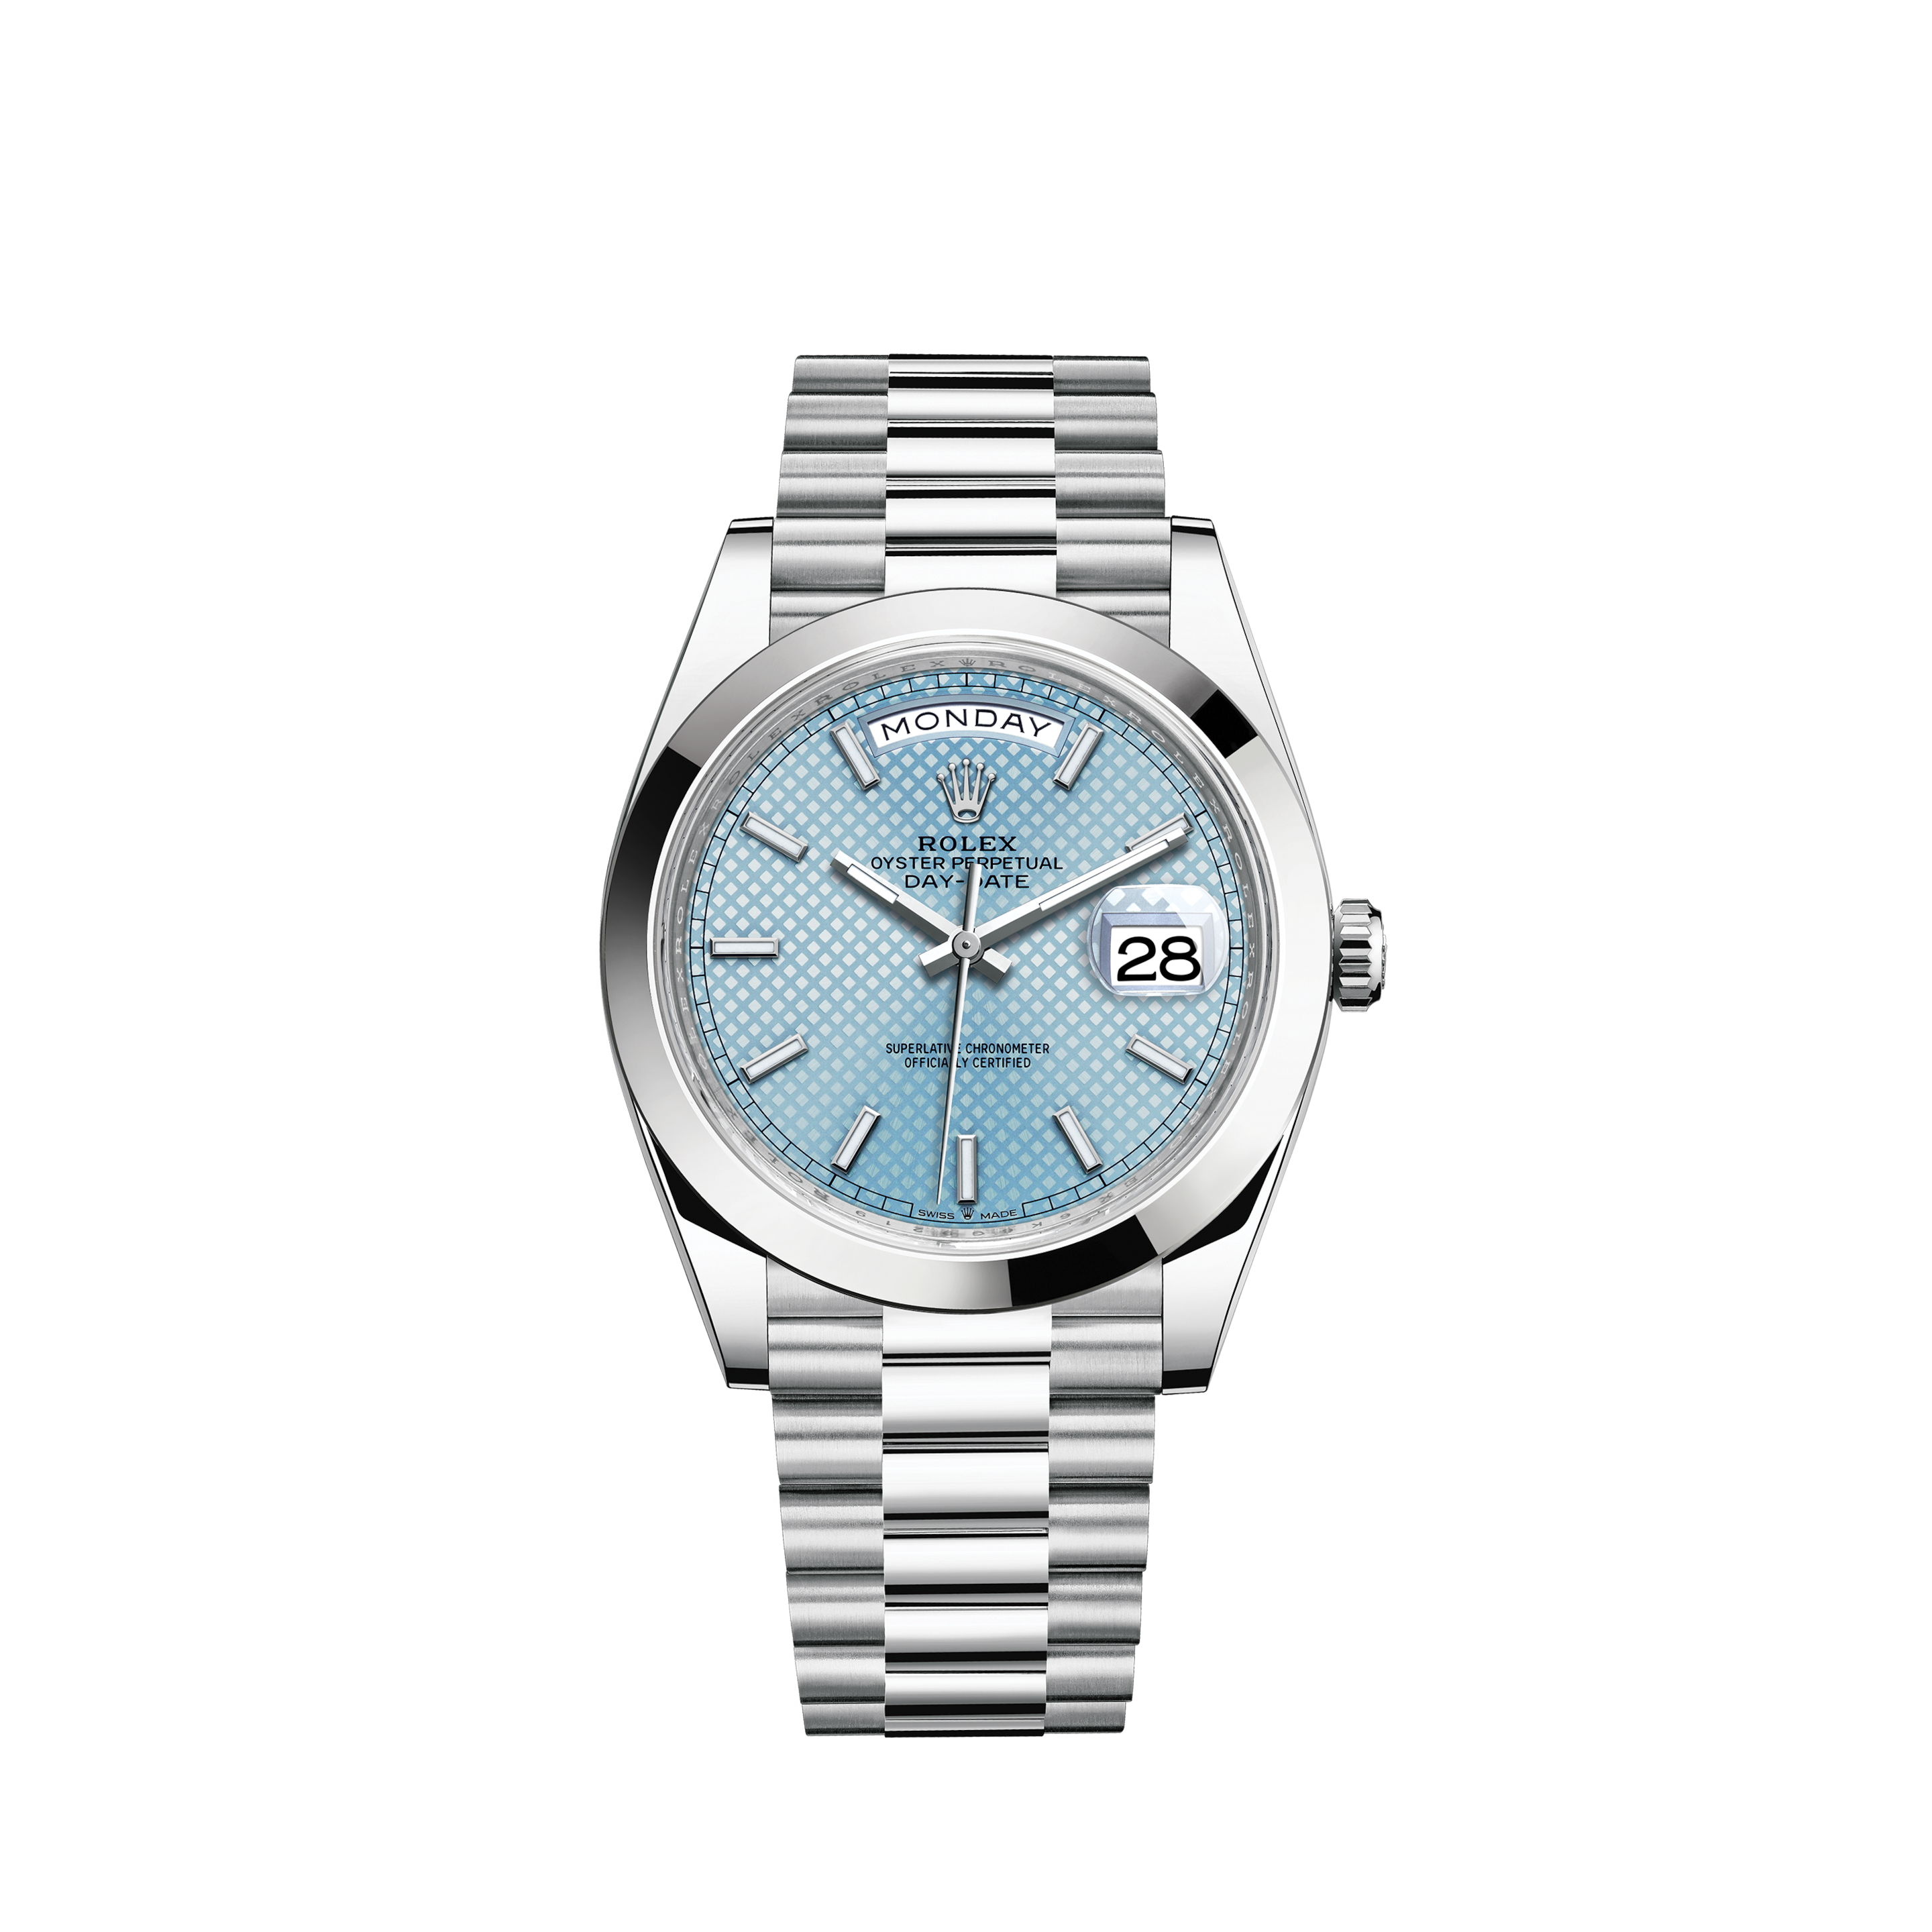 Rolex Oyster Perpetual open 6/9 - Stahl / Gelbgold - Armband Stahl / Gelbgold / Oyster - 36mm - Sehr gut - VintageRolex Women's Rolex 31mm Datejust Two Tone Jubilee Jubilee Ice Blue Color Dial Diamond Accent Bezel + Lugs + Sapphire